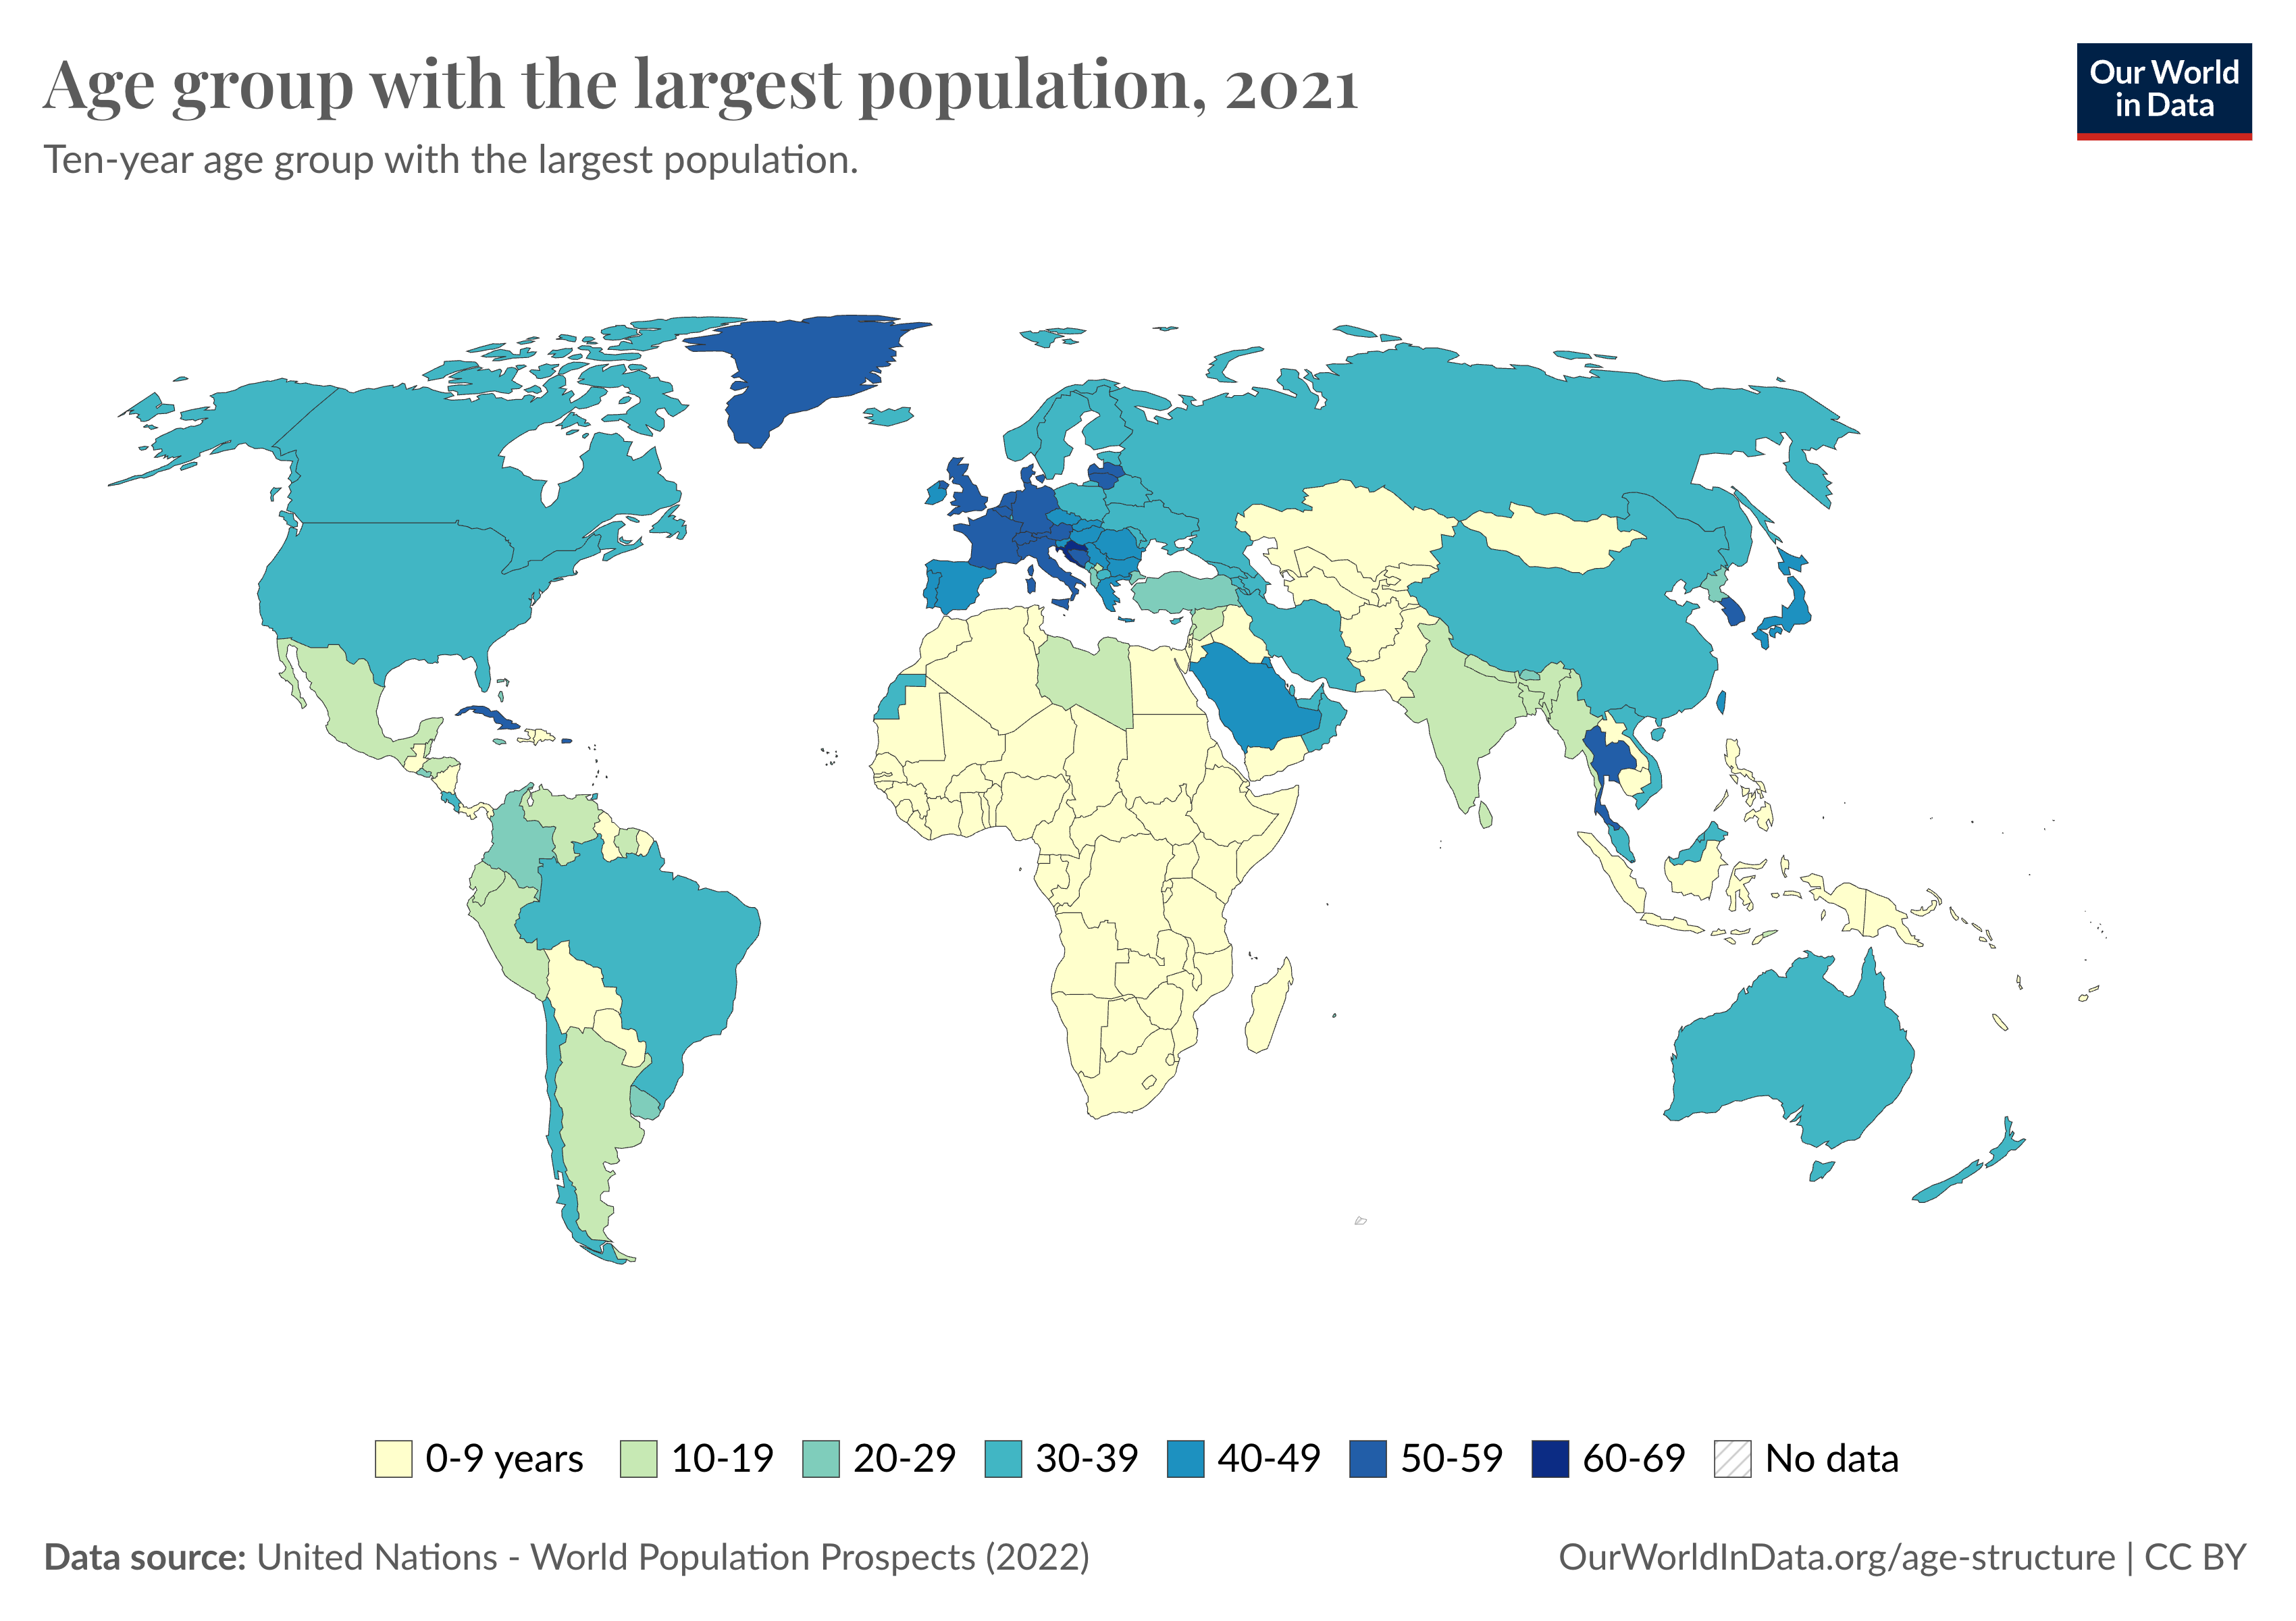 
The image is a world map titled "Age group with the largest population, 2021," showing the ten-year age group that has the largest population in each country. The map uses a color-coded system to differentiate age groups: yellow for ages 0-9, light green for ages 10-19, teal for ages 20-29, light blue for ages 30-39, blue for ages 40-49, dark blue for ages 50-59, and dark teal for ages 60-69. Most European countries have older populations. North America predominantly has the largest population in the 30-39 age group, while much of Africa shows the largest population in the 0-9 age group. The source of the data is the United Nations - World Population Prospects (2022) and the image is credited to Our World in Data.